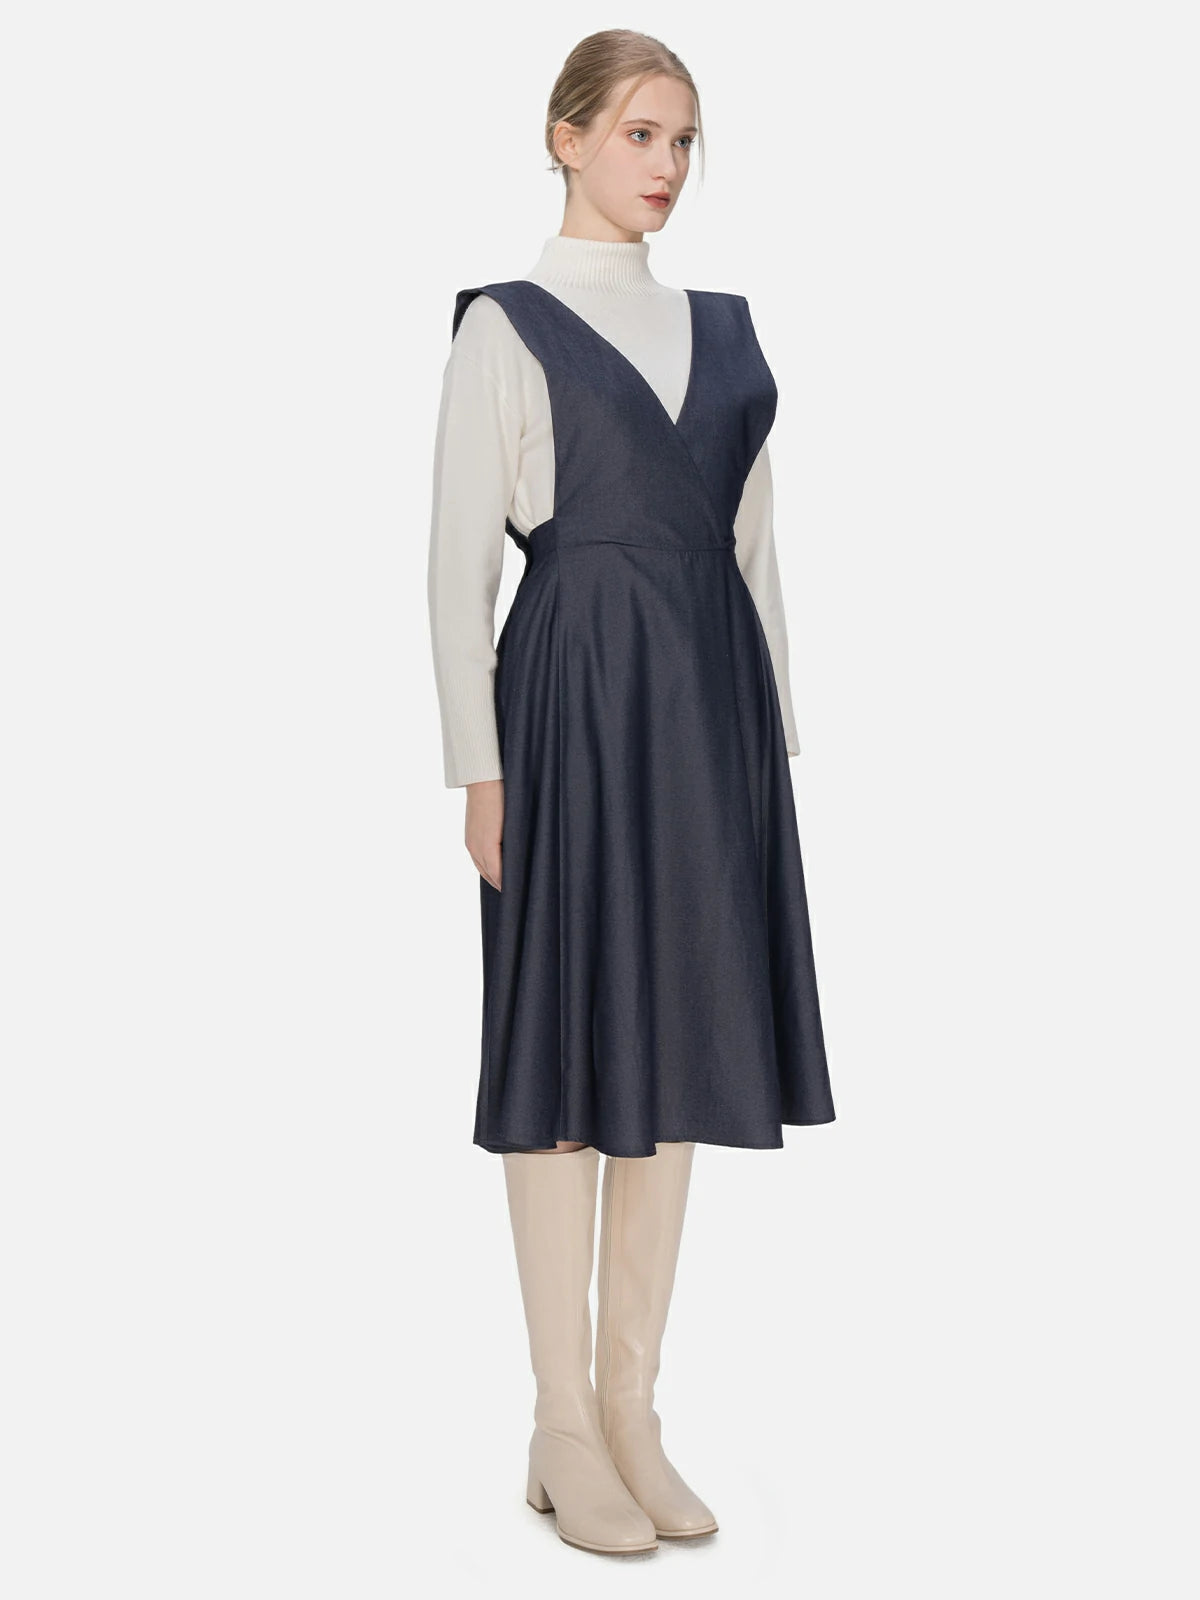 Versatile V-neck overall dress featuring an elastic waist design, tailored cut, and overall strap detail, ensuring a snug fit and an elegant silhouette suitable for diverse settings.